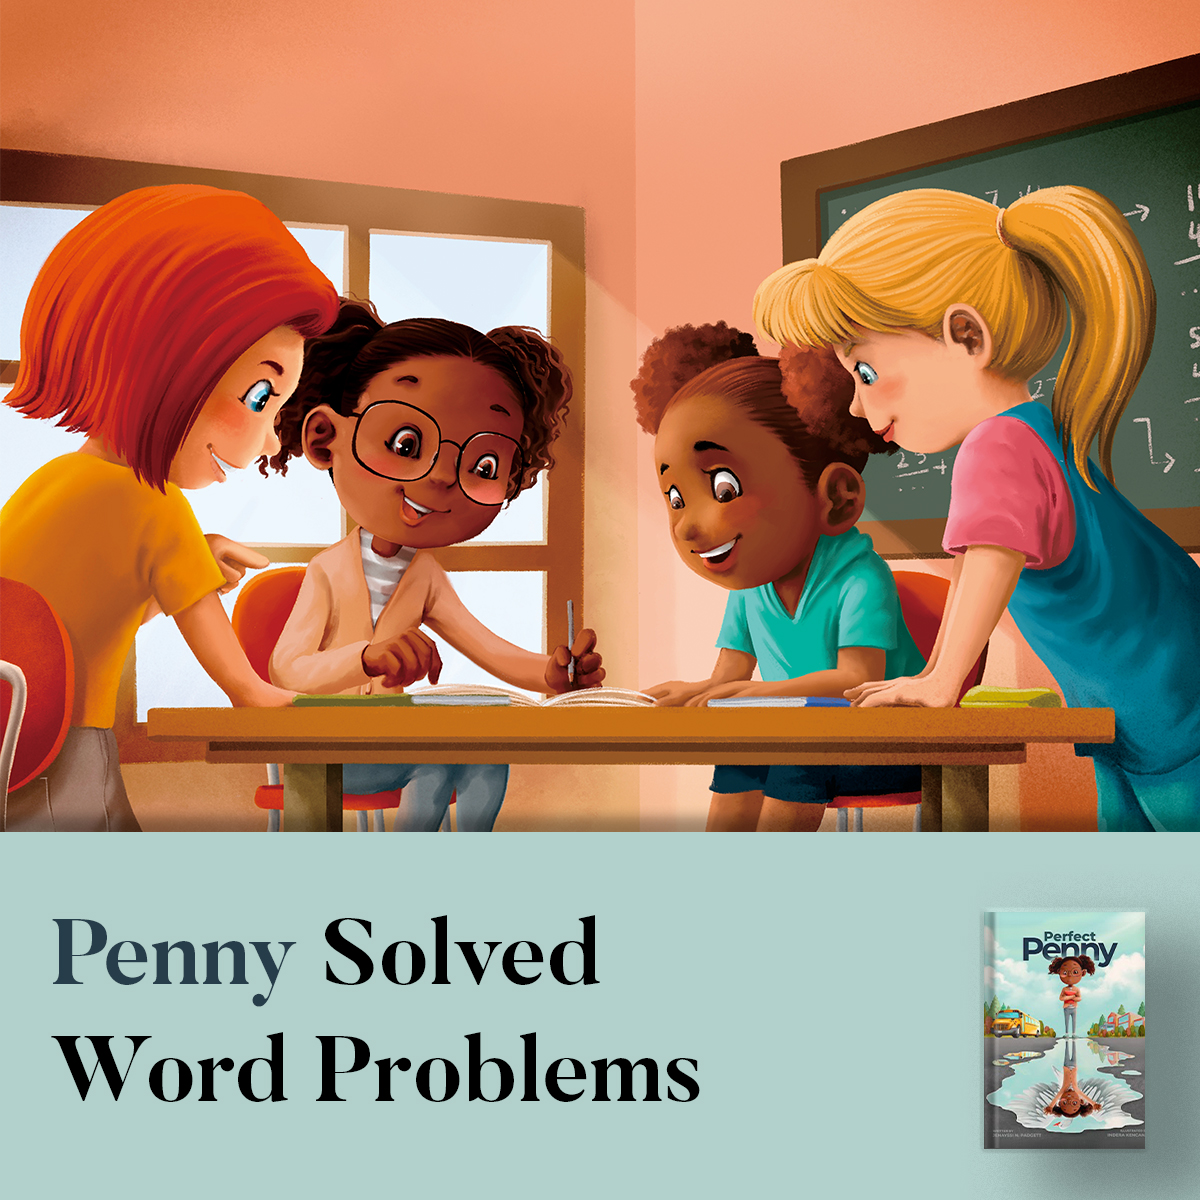 Penny's got the brains and the brawn to conquer any math problem! Get a copy of the book Perfect Penny written by Jenayssi Padget now by clicking the link perfectpennyseries.com #childrenbook #author #booklaunch #authorlife #readingcommunity #childreneducation #perfectpenny